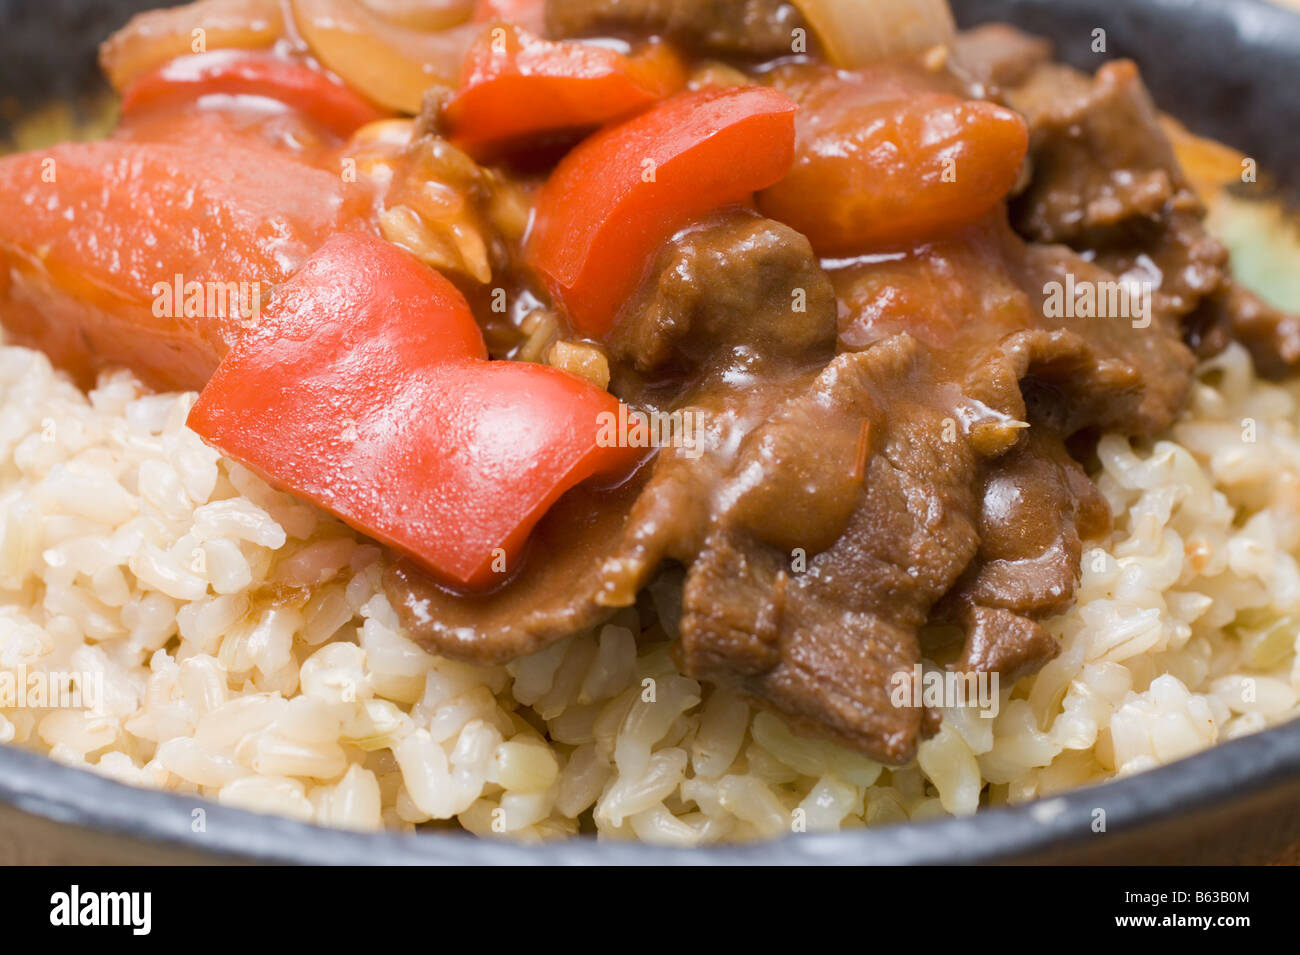 Japanese Beef and Tomato Stir Fry on brown rice Stock Photo